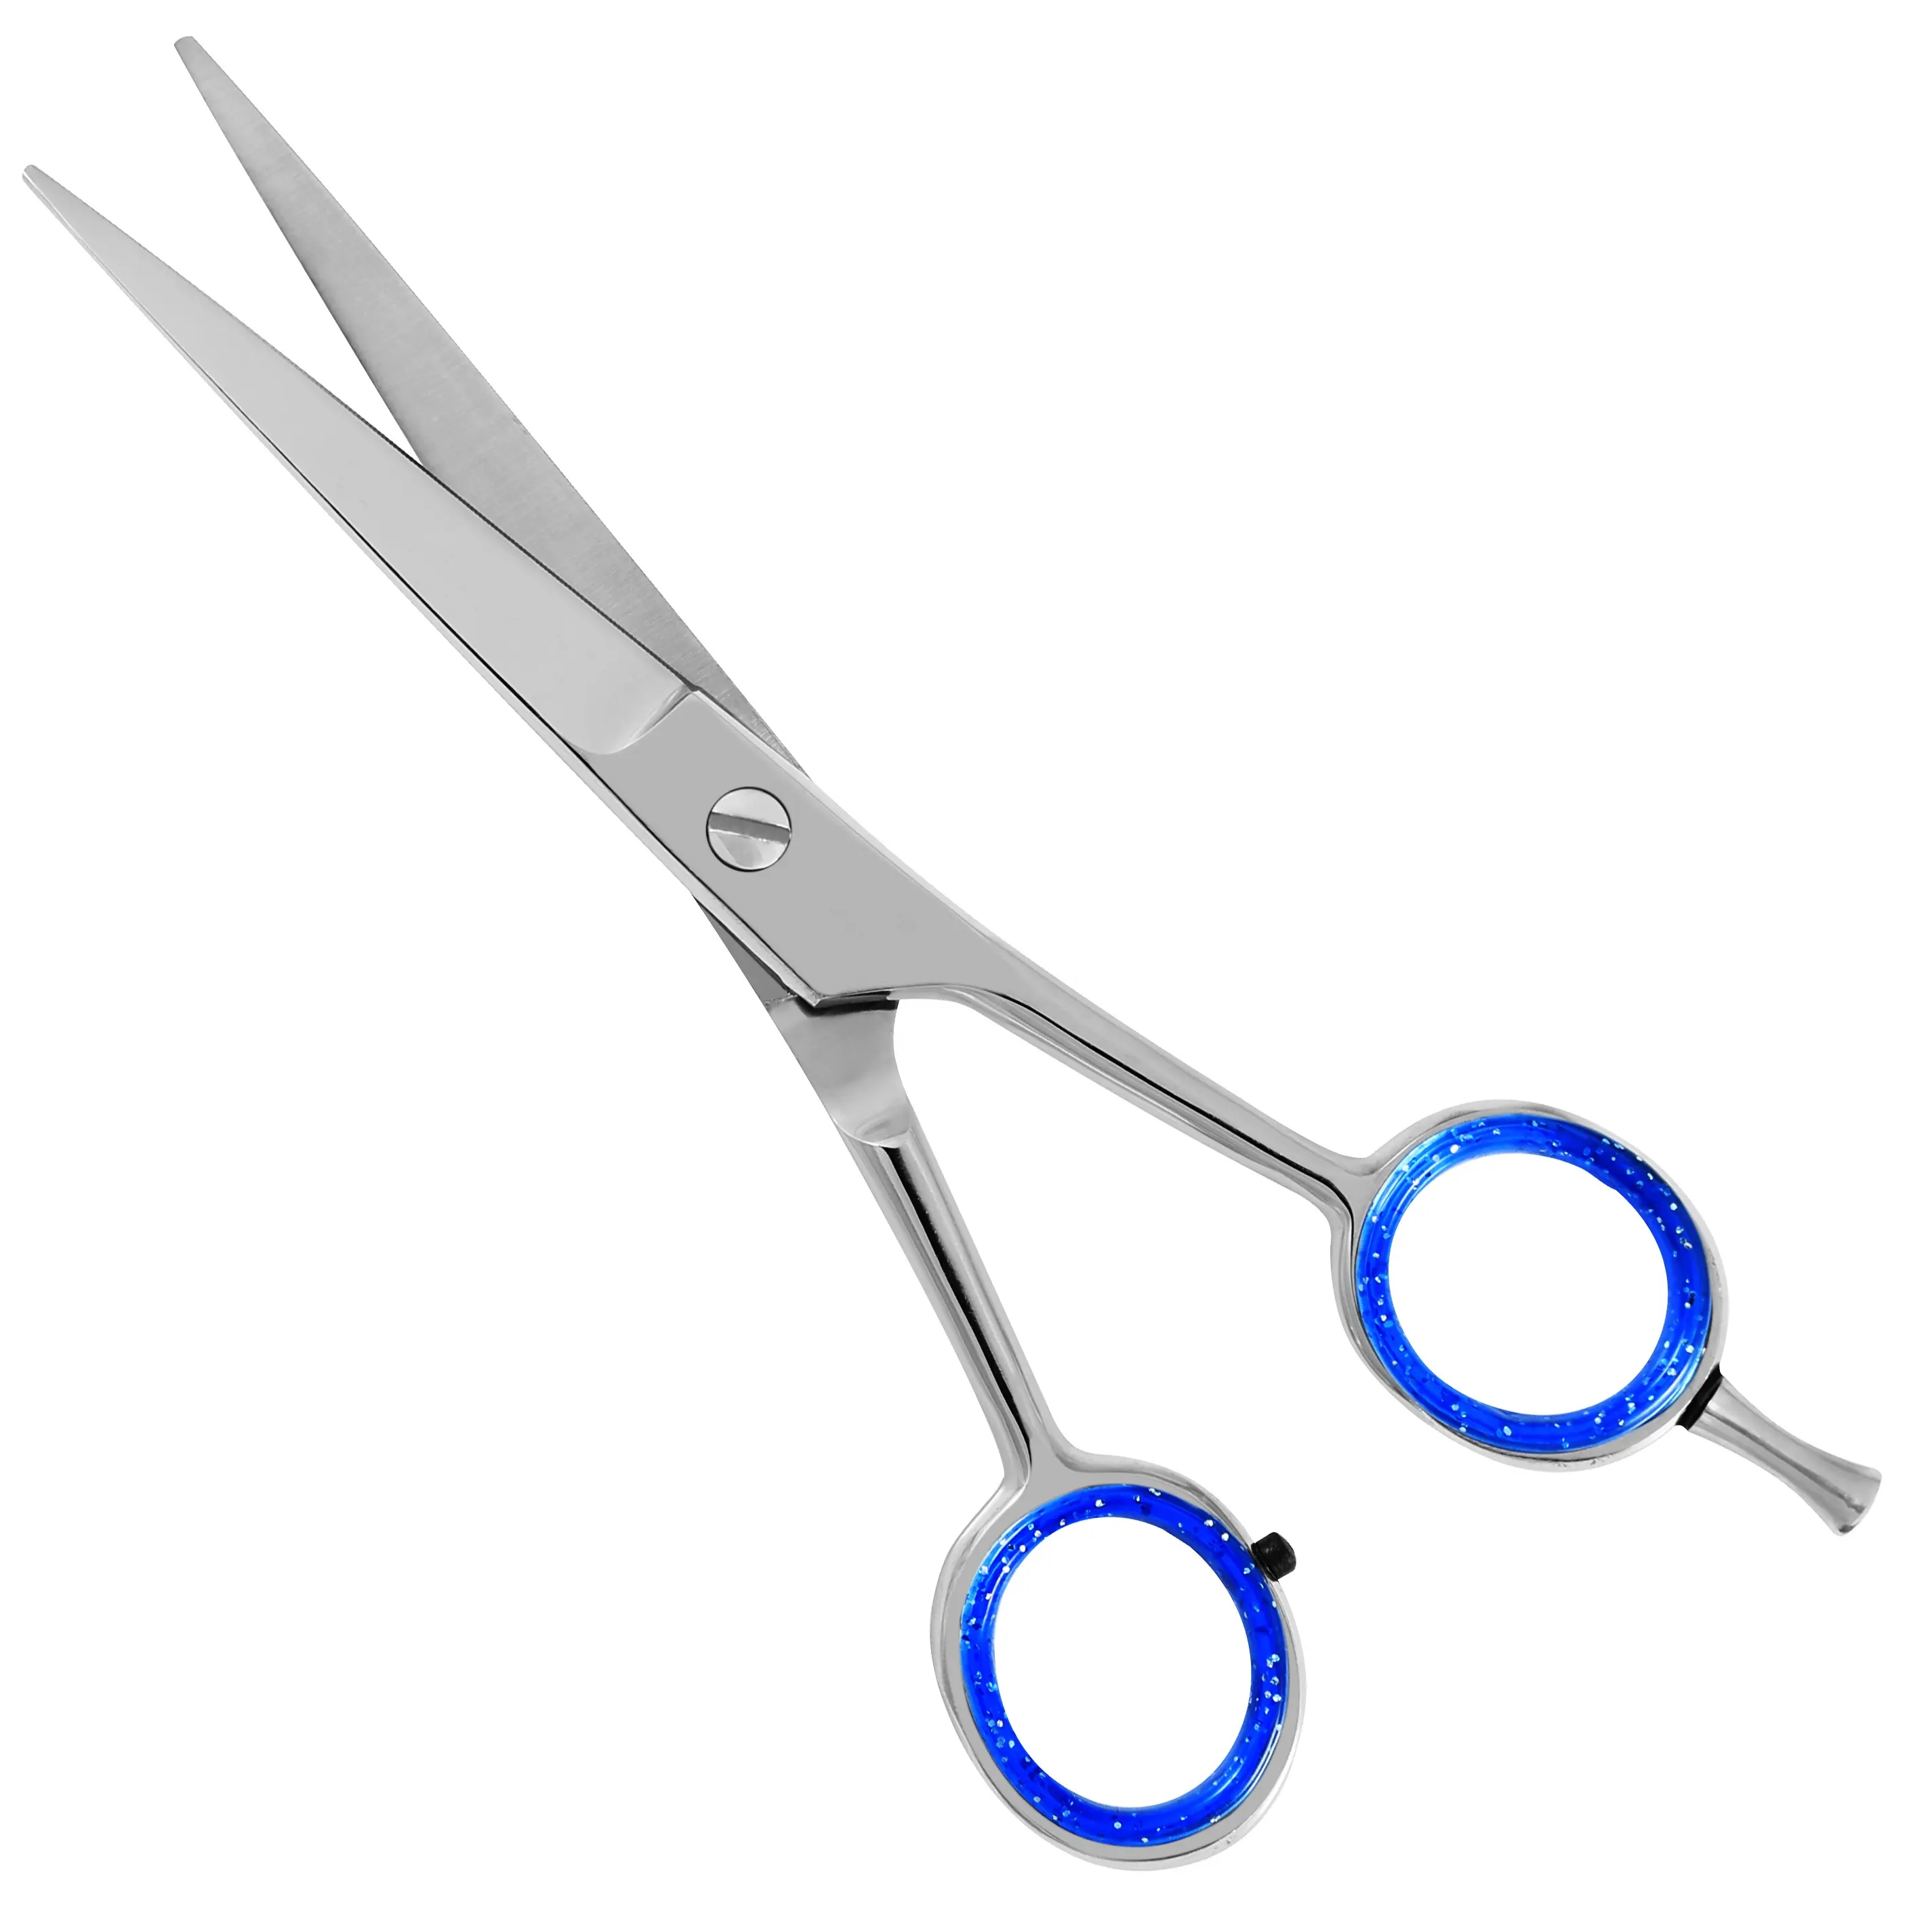 Fashion Design Beauty Barber Hair Scissor HRC Steel Style with Customized 6 Inch Stainless Steel Stainless Steel Blunt-sharp